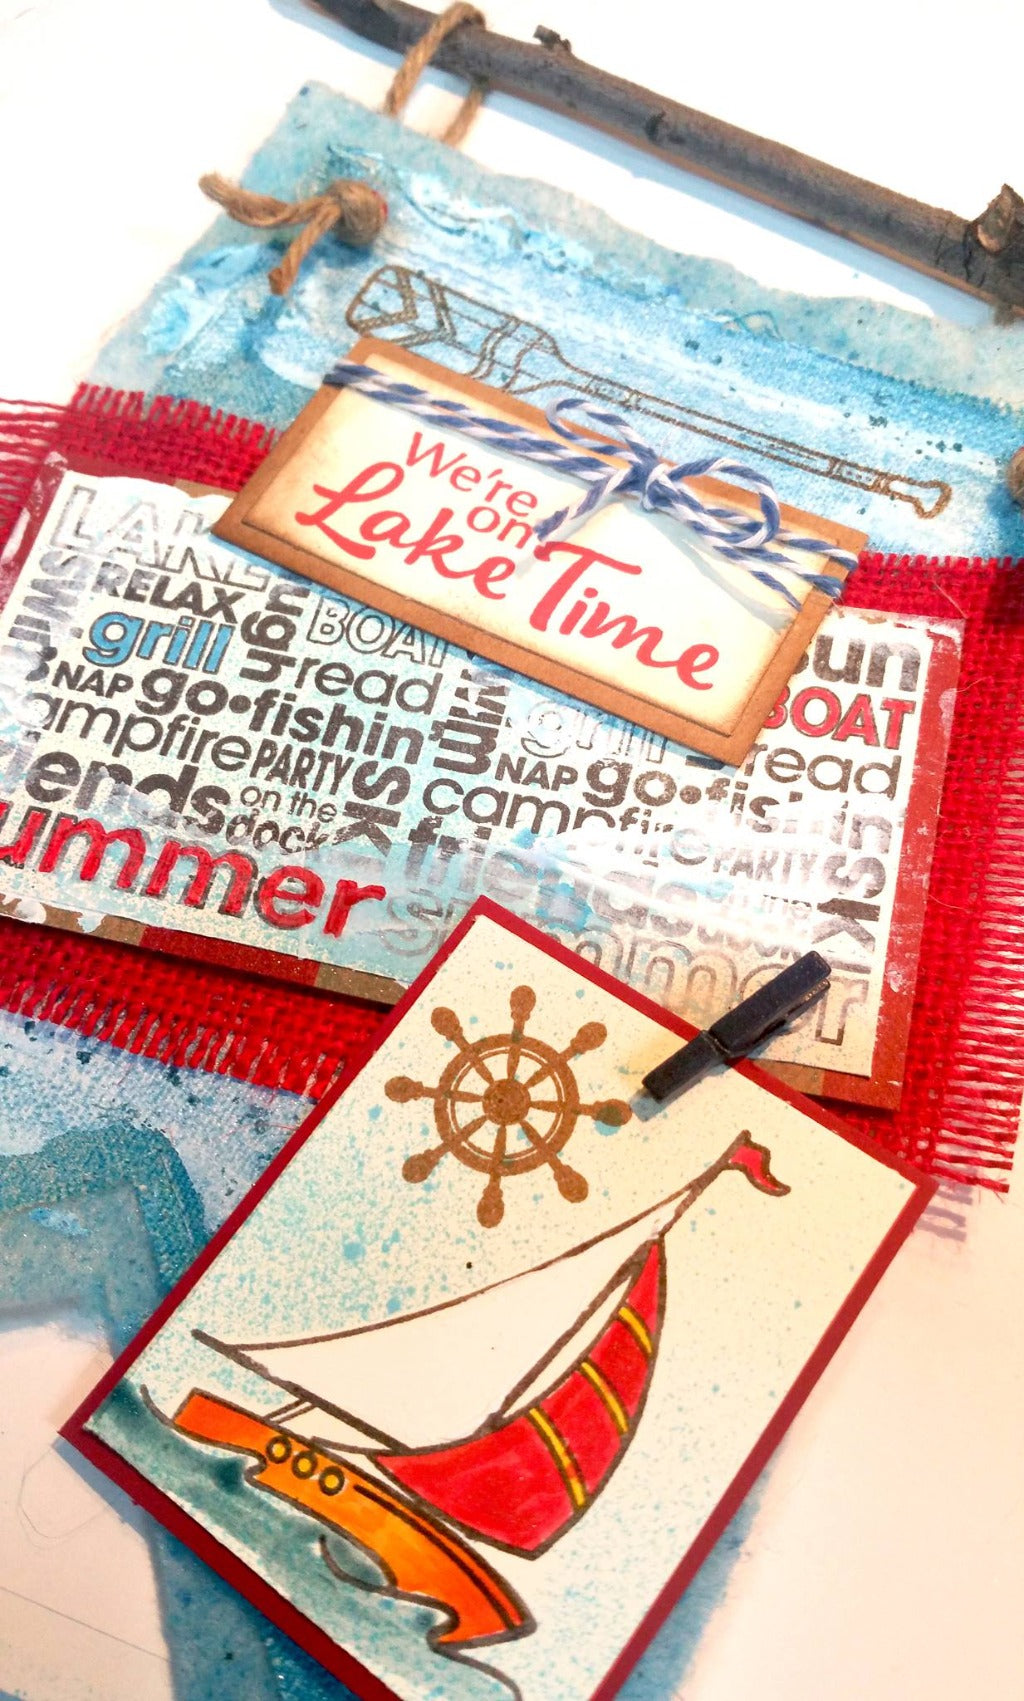 It is summer time and this is the perfect stamp set to have for card making and scrapbooking. Pair this clear stamp set with our other summer stamp sets by Dare 2B Artzy!